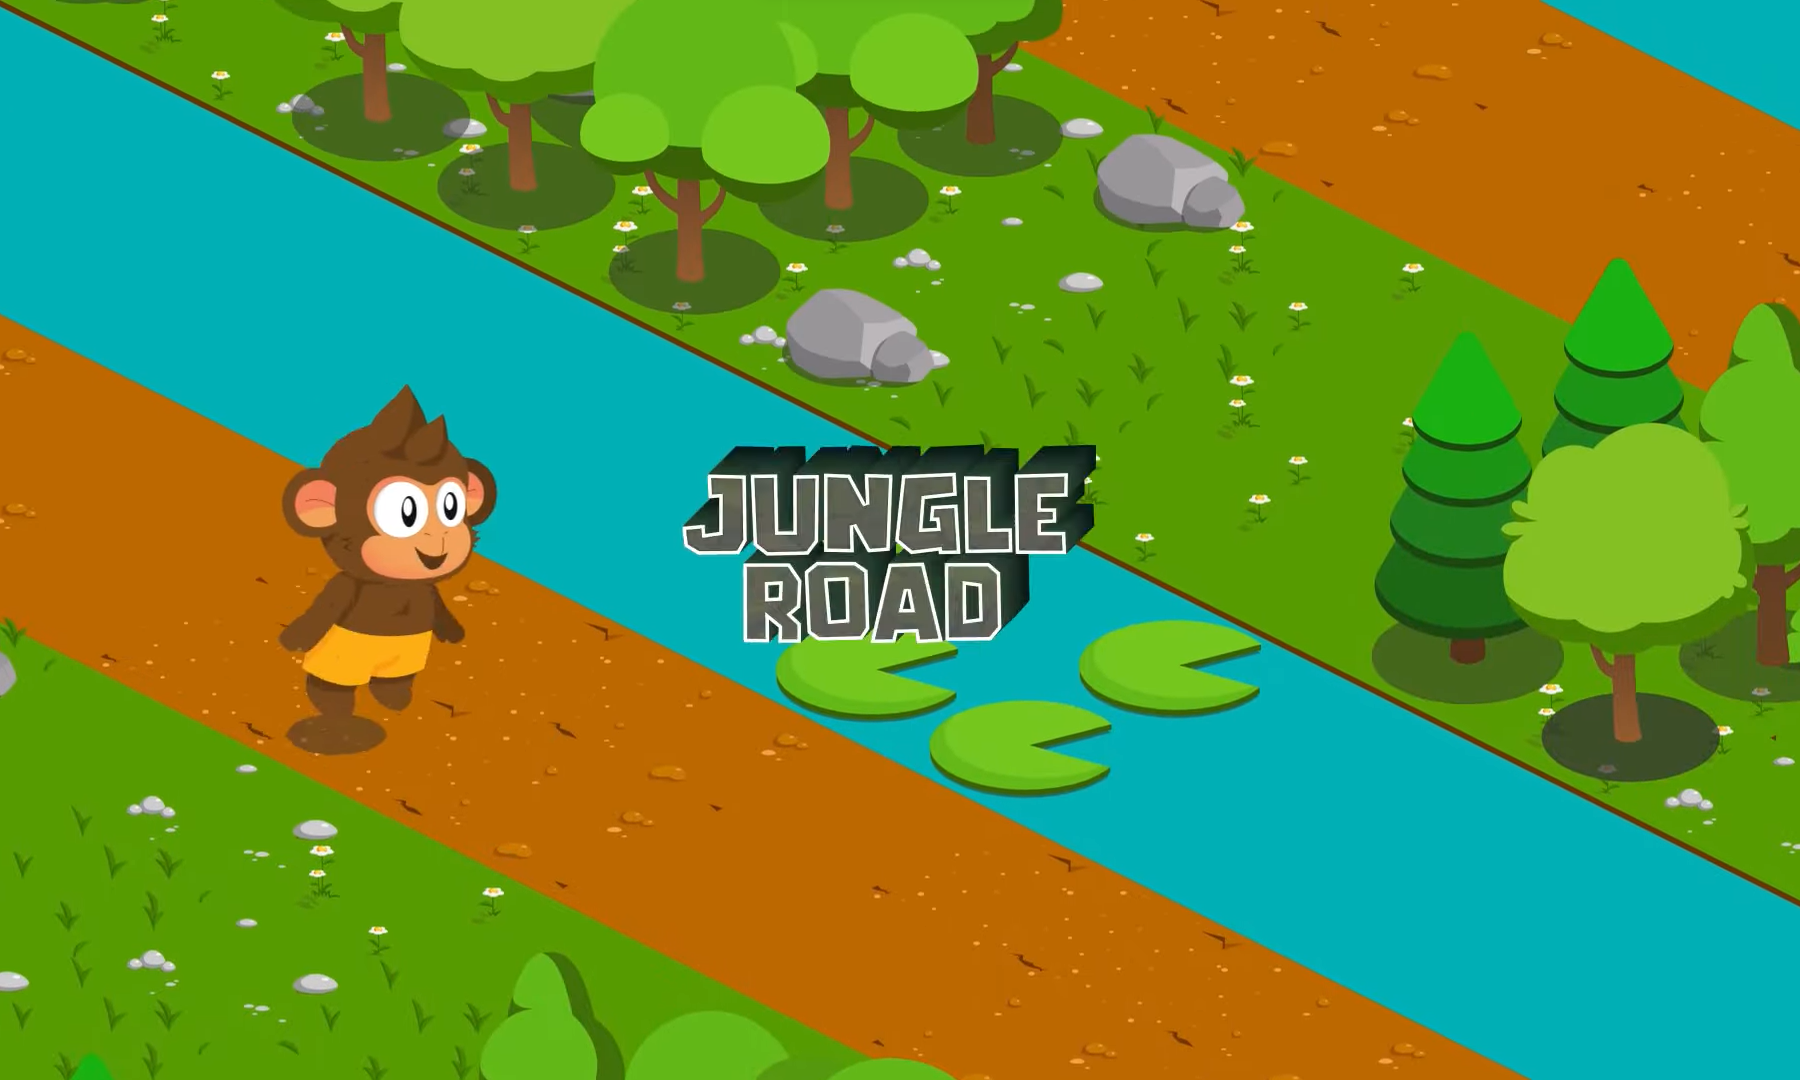 background image of Jungle Road